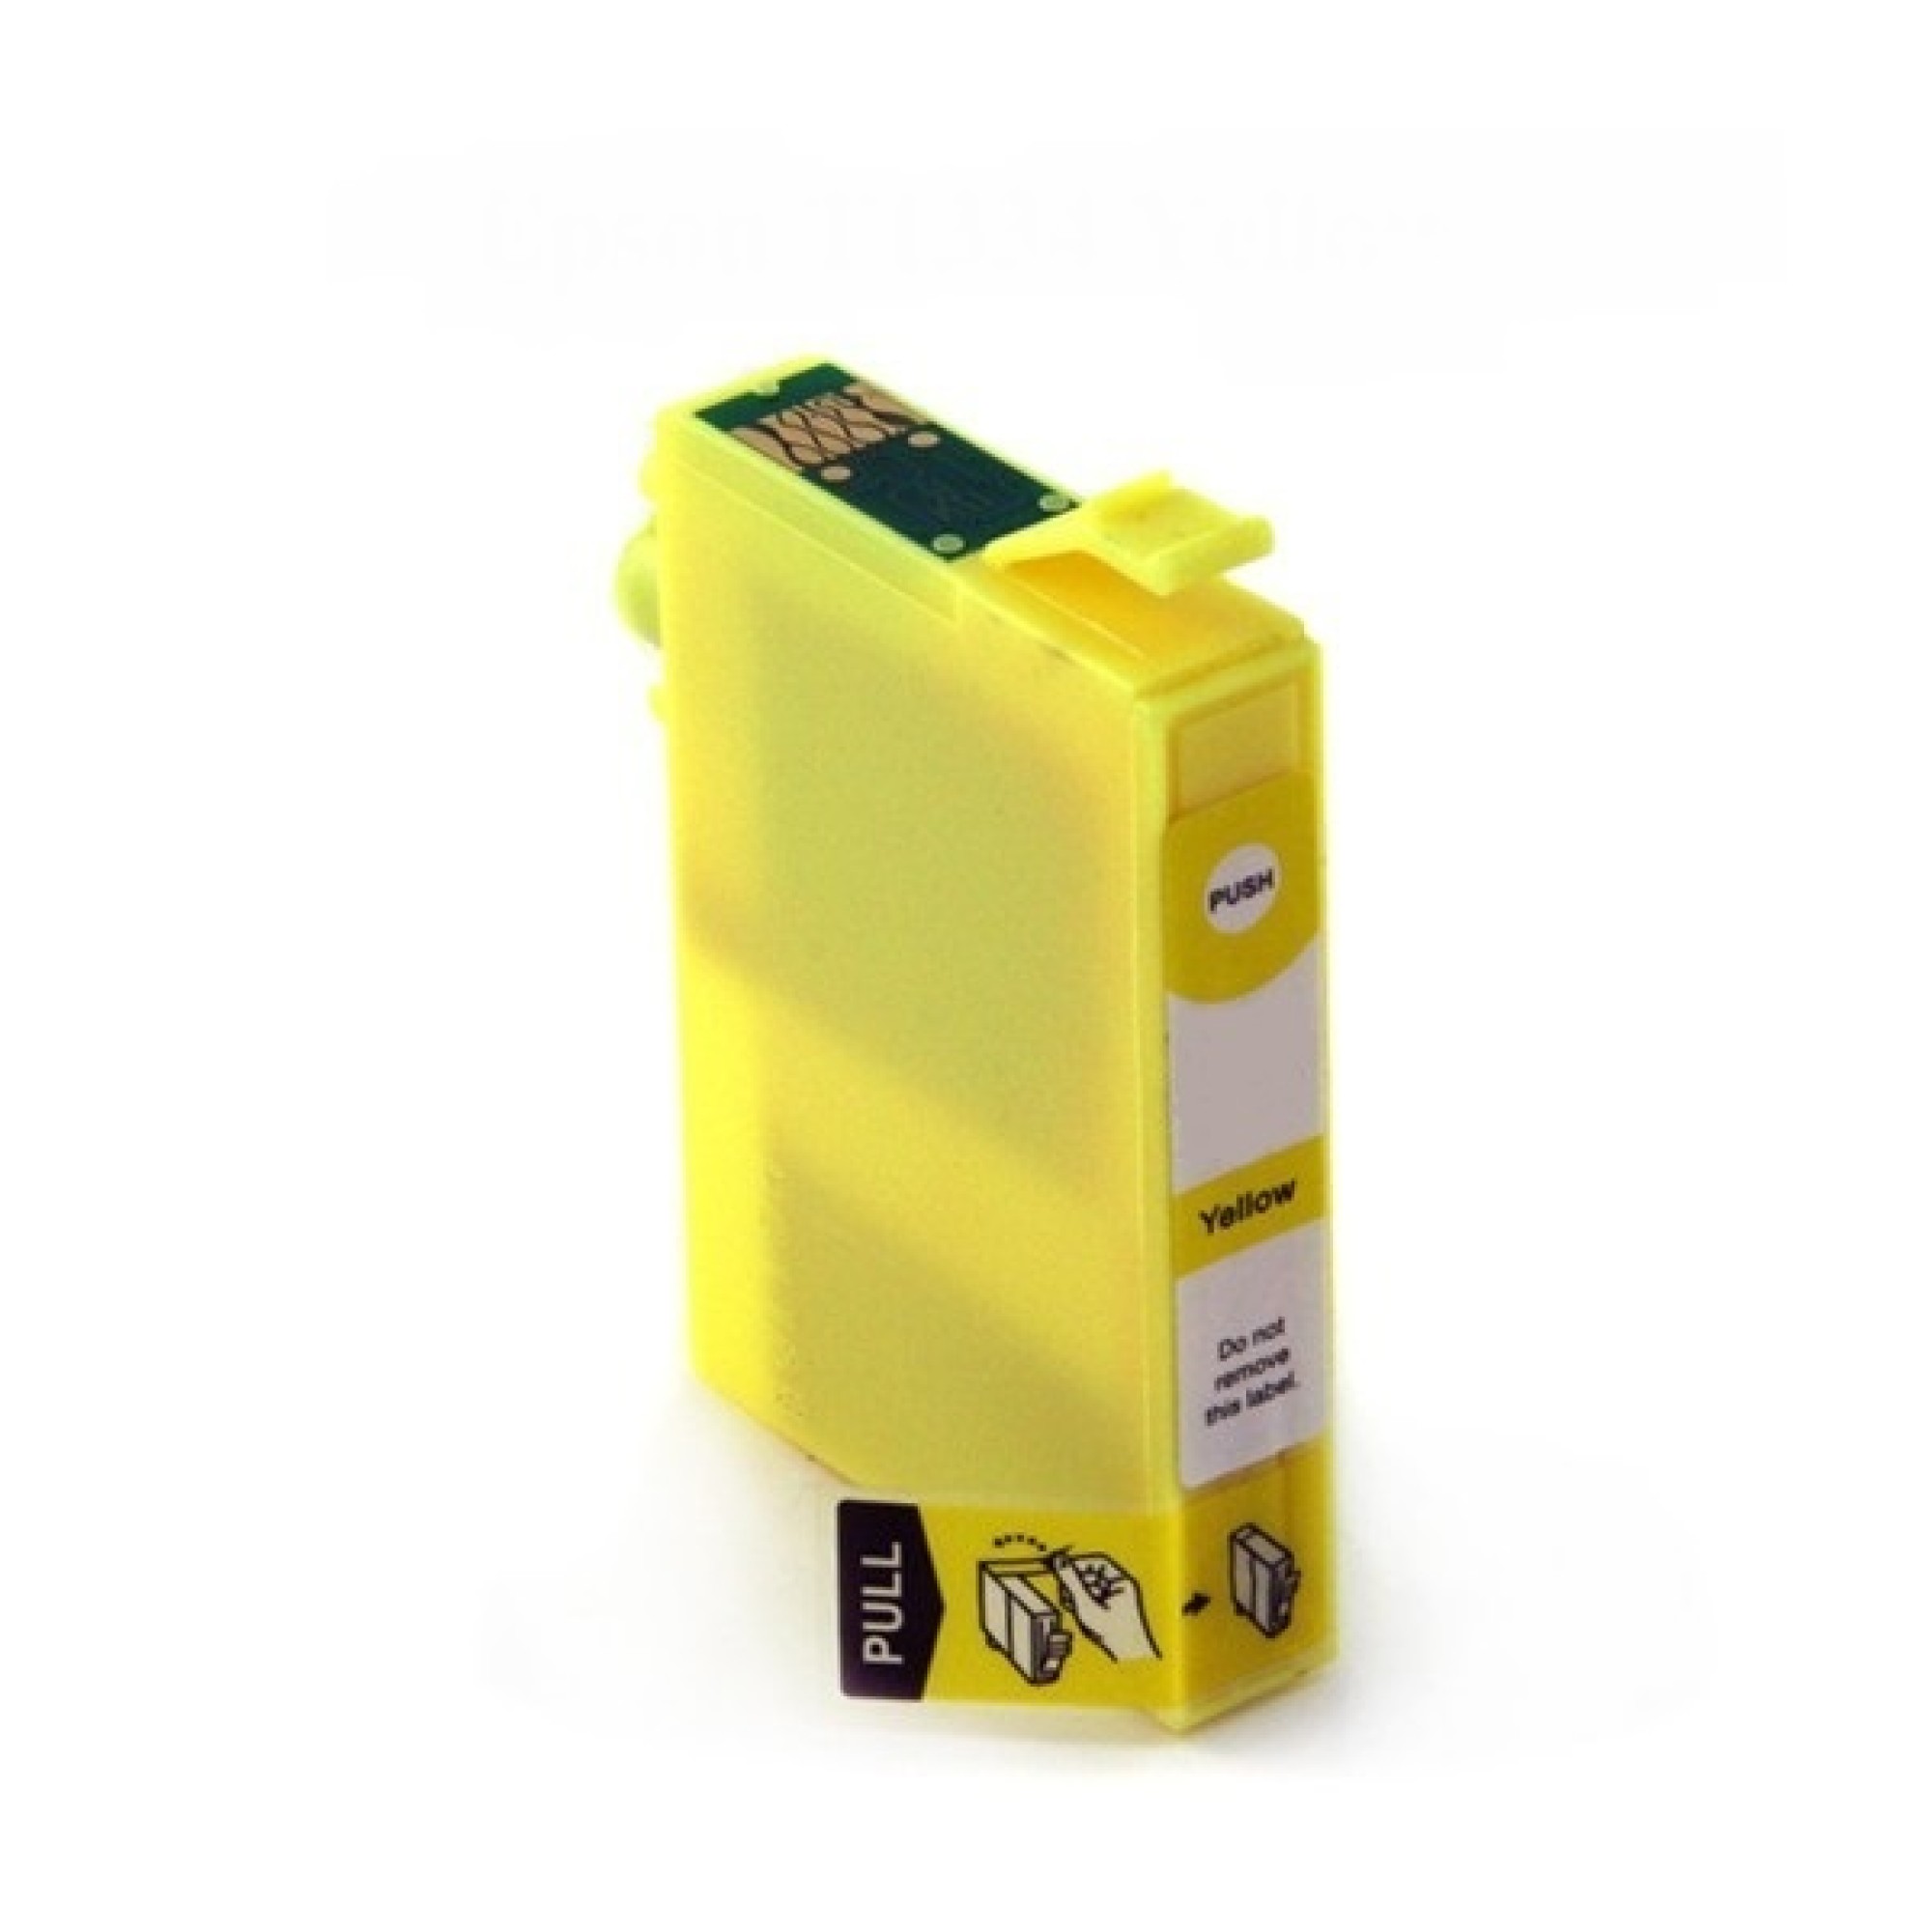 EPSON 220XL YELLOW INK CARTRIDGE COMPATIBLE